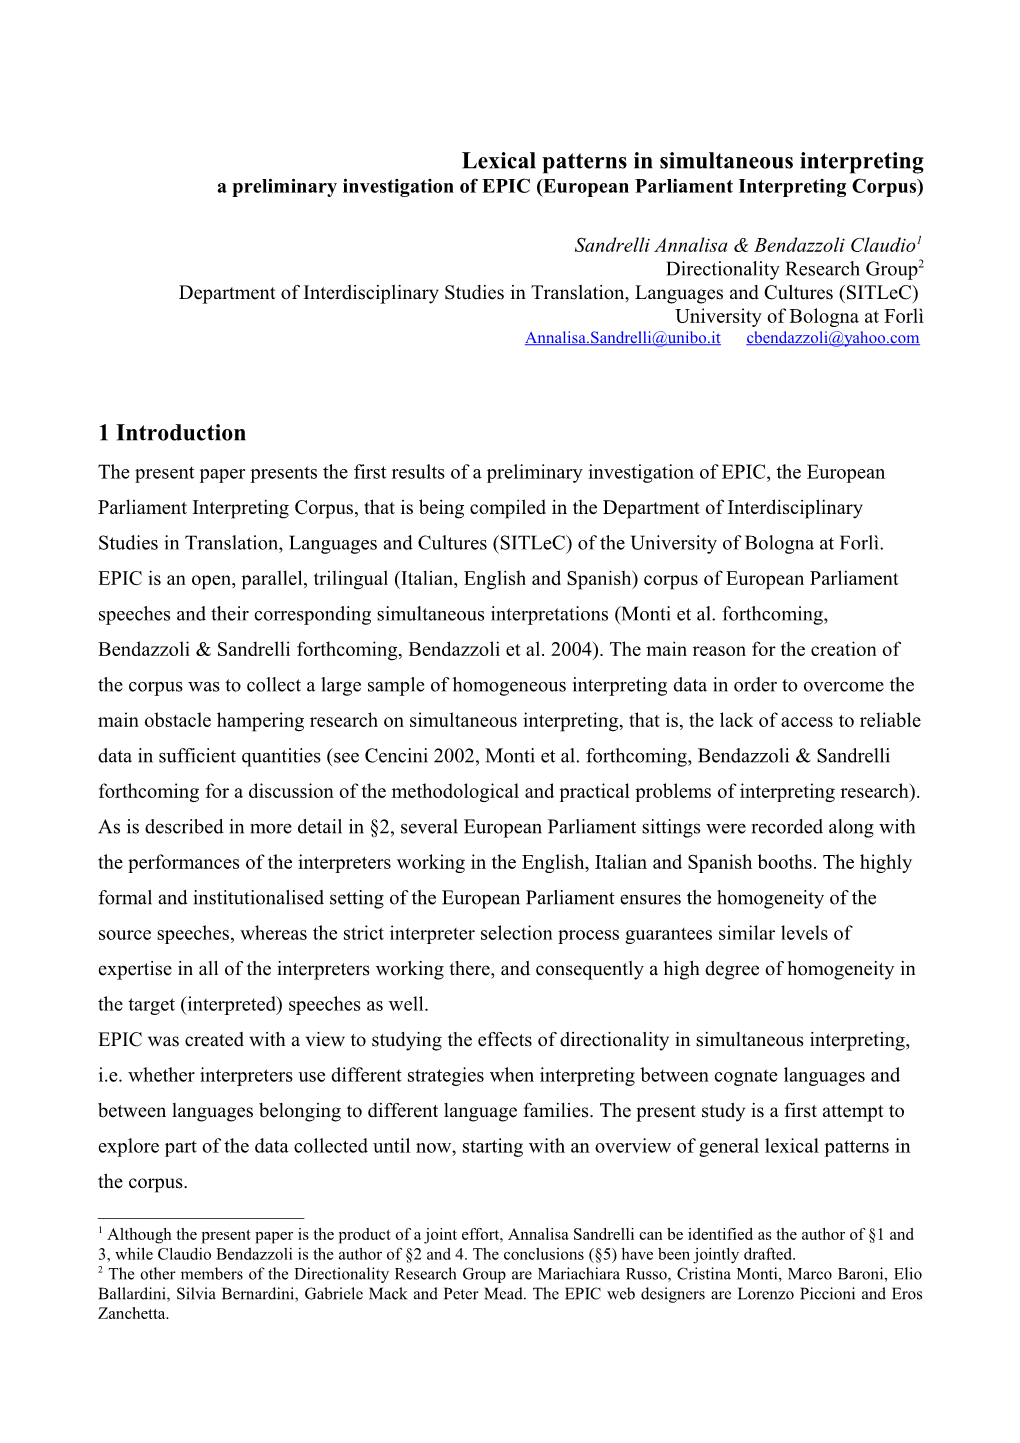 Lexical Patterns in Simultaneous Interpreting: a Preliminary Investigation of EPIC (European